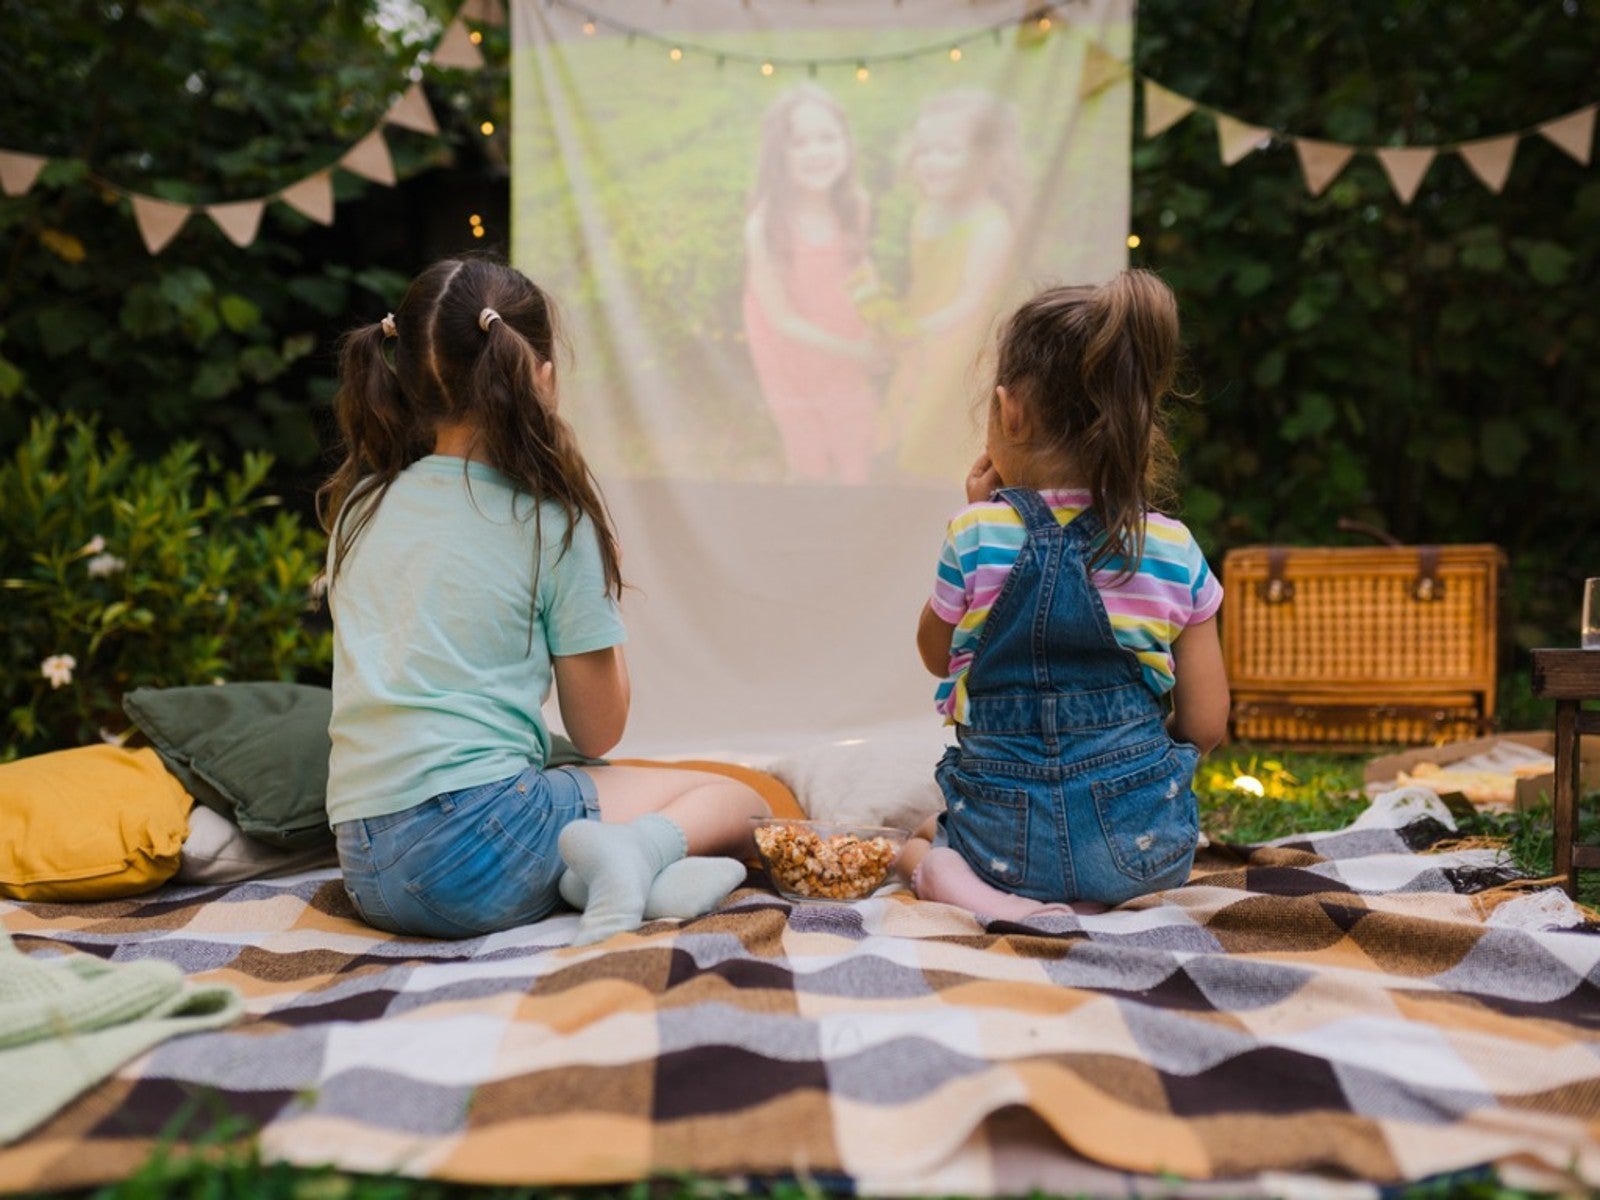 Two girls sit outside on a blanket watching a movie projected on a hanging sheet